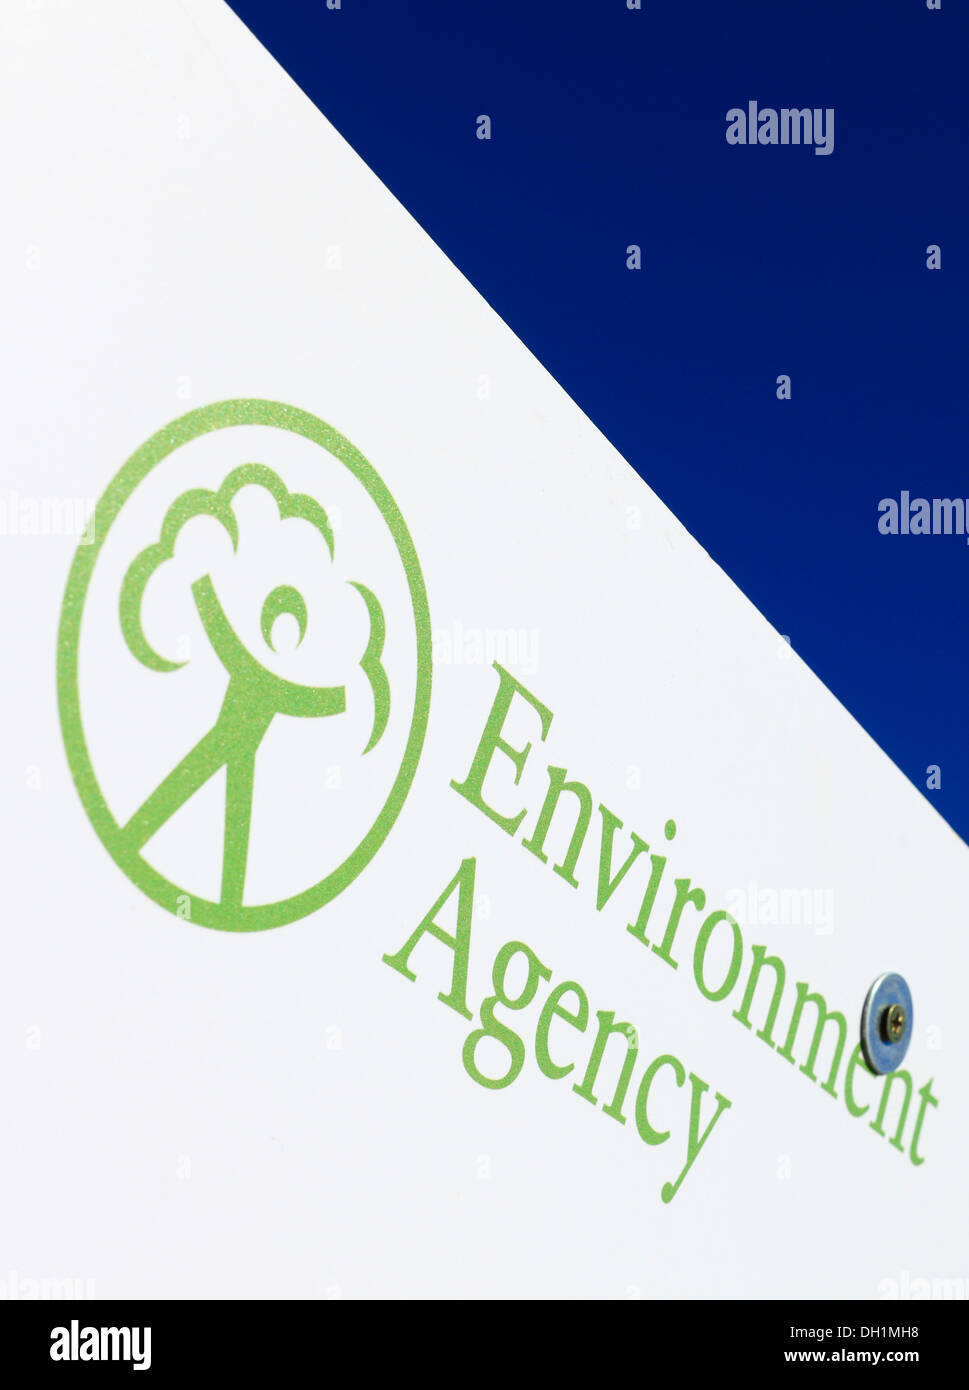 Environment Agency logo on a board with blue sky behind. Stock Photo